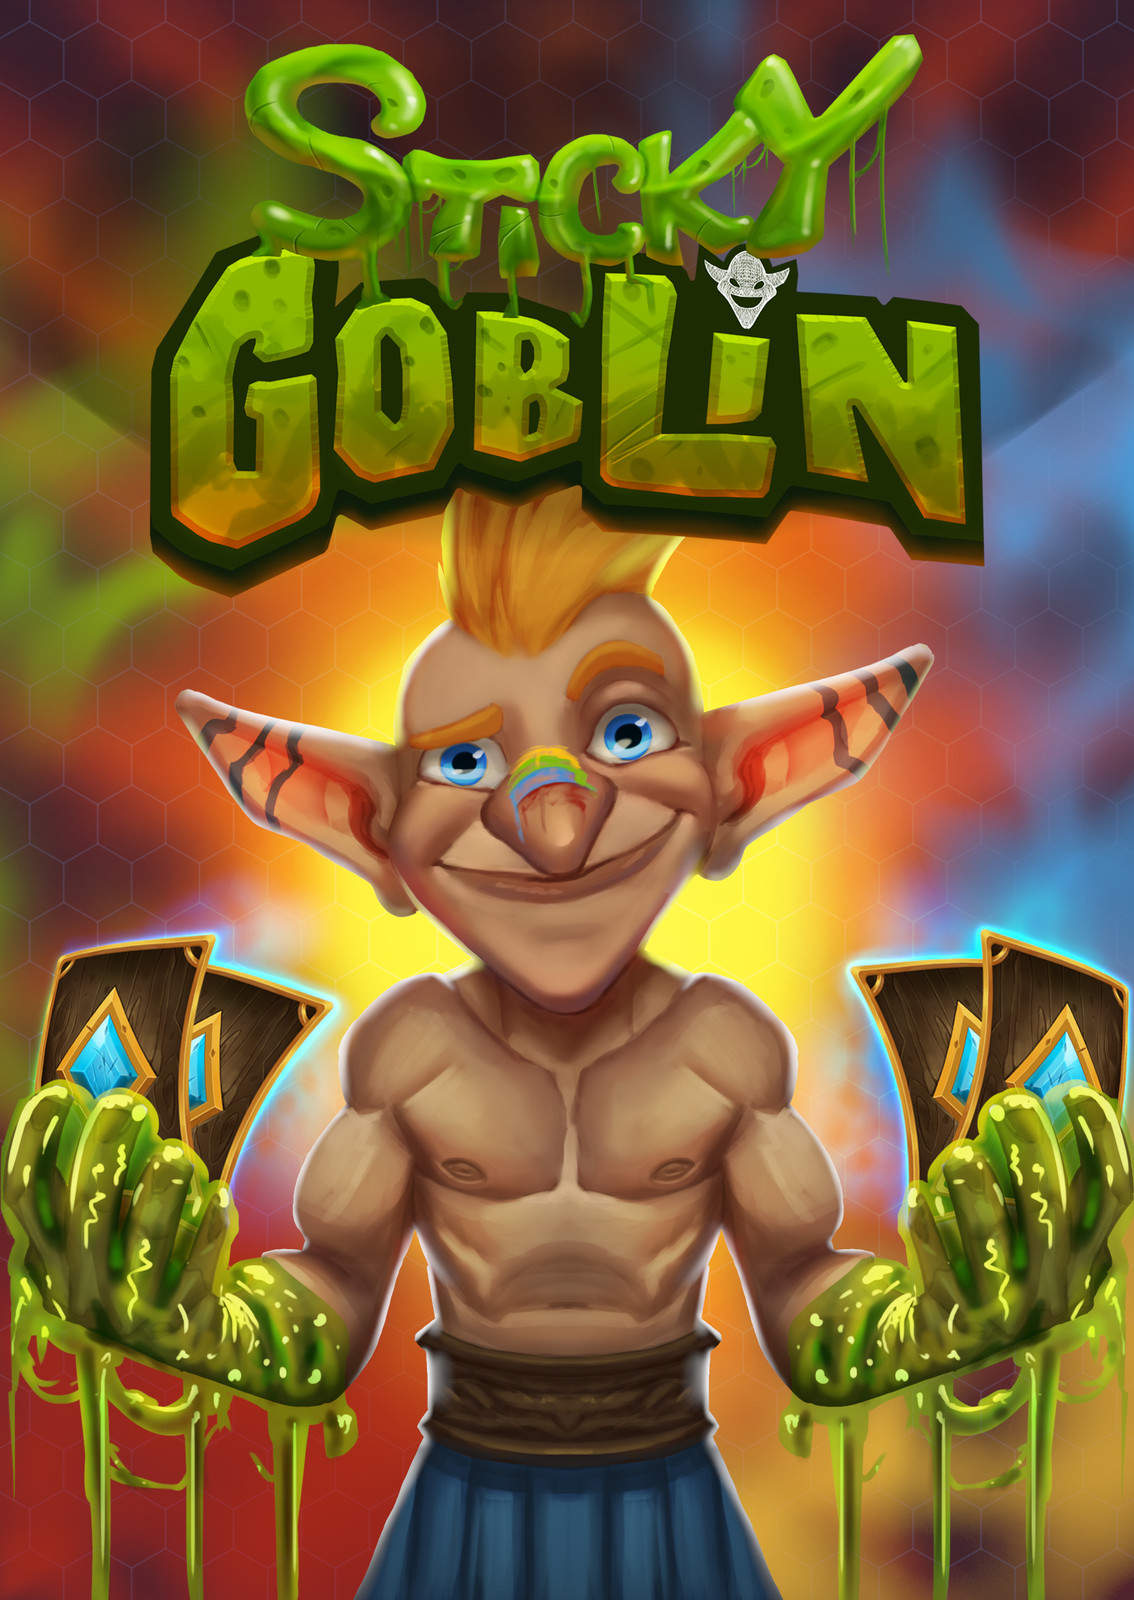 Sticky Goblin logo and art of front of box